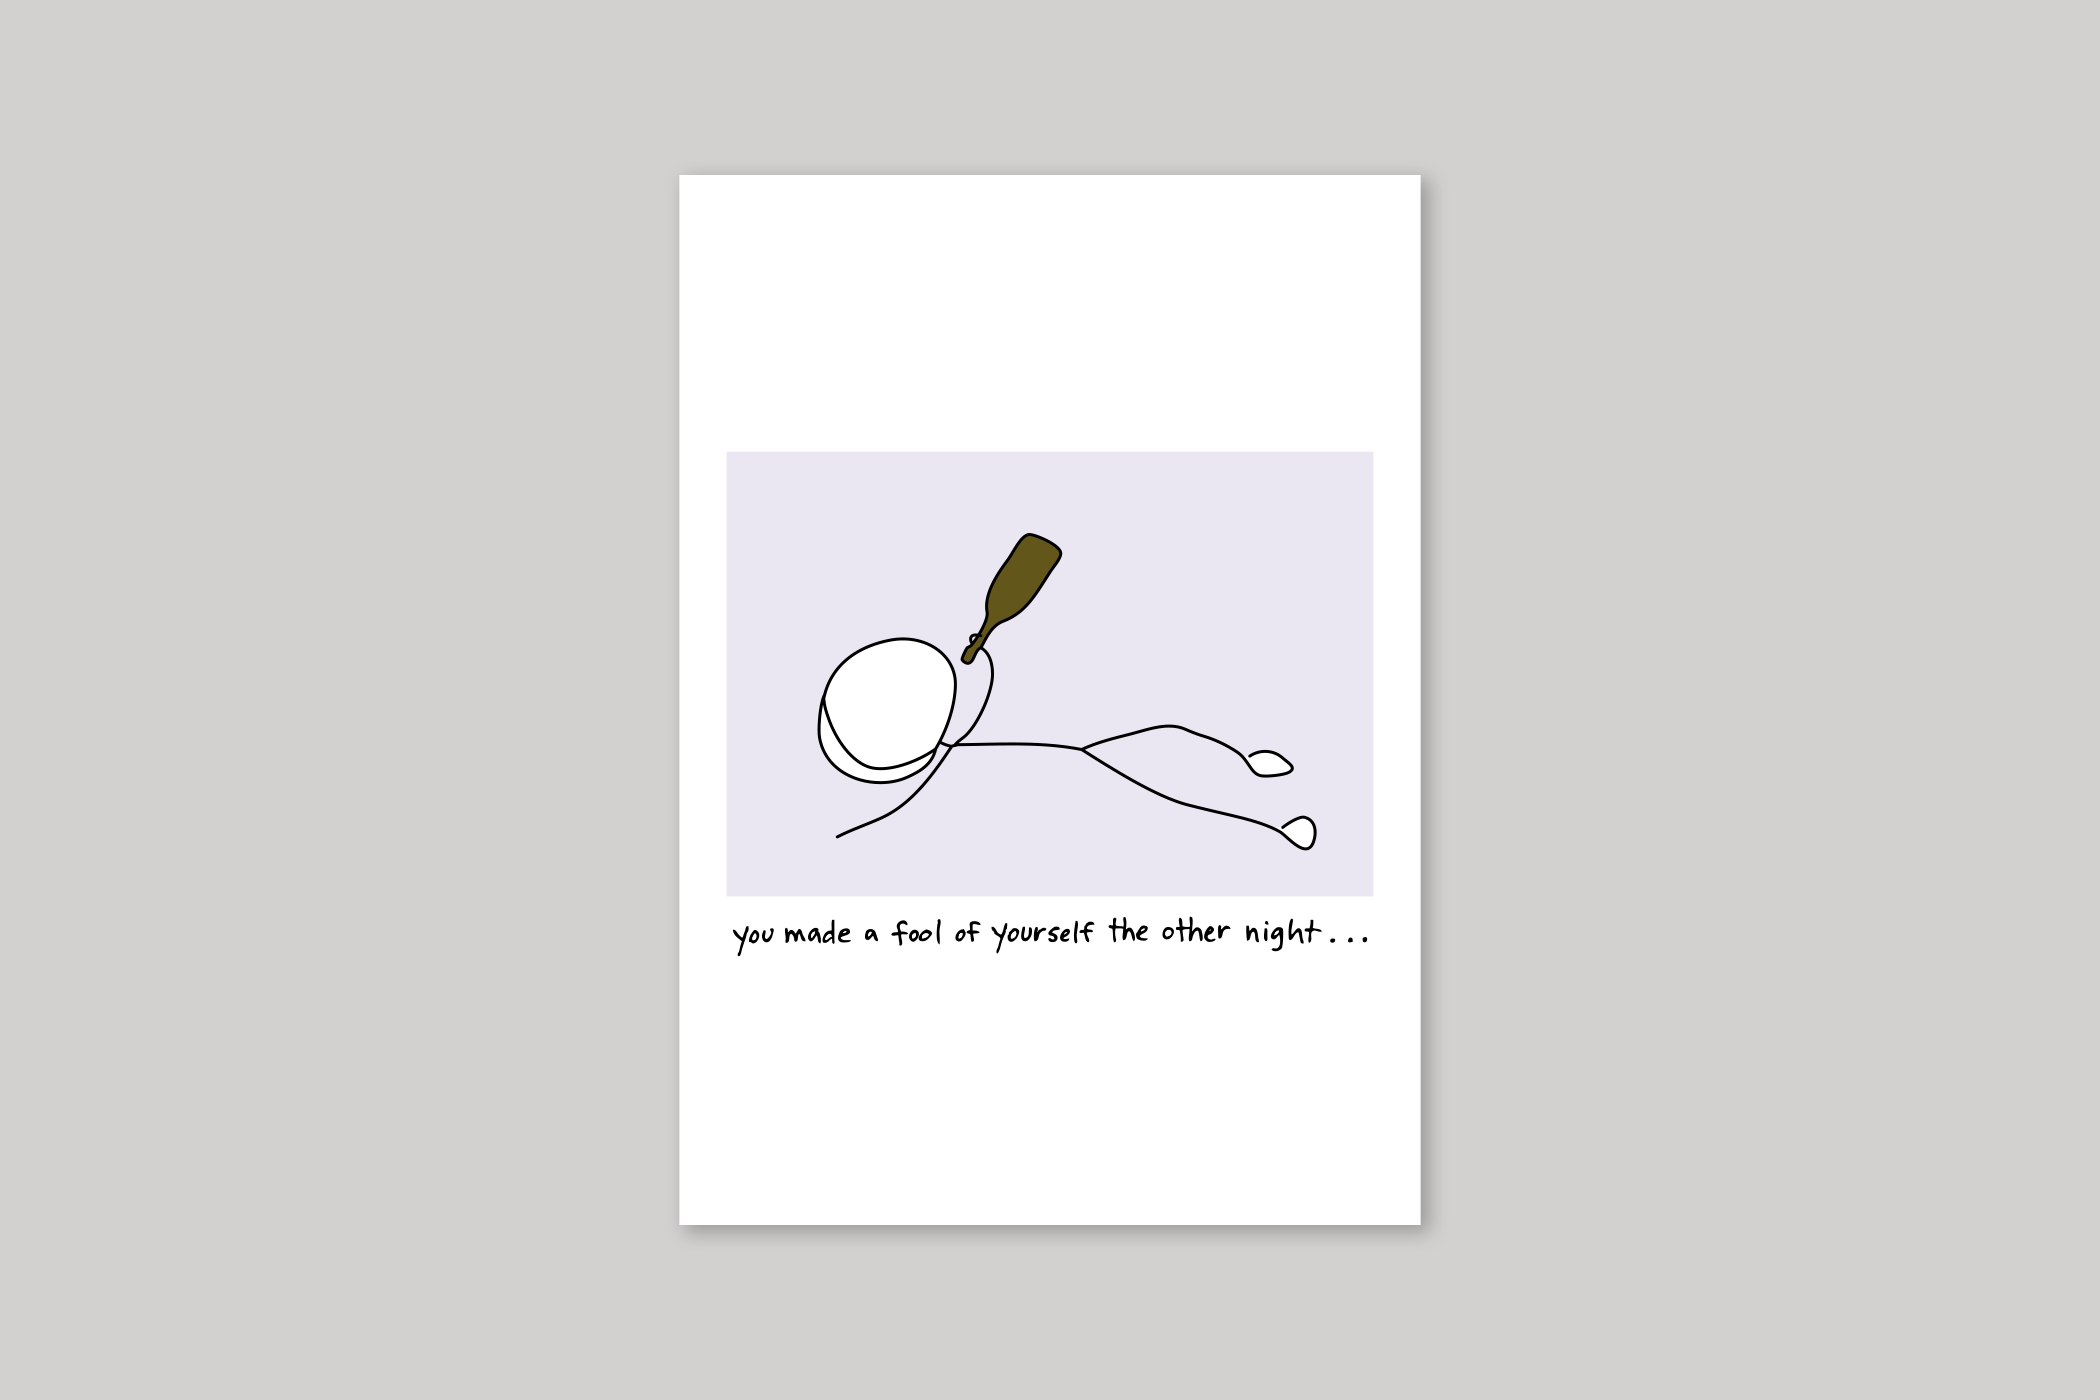 You Made A Fool of Yourself humorous illustration from Mean Cards range of greeting cards by Icon.